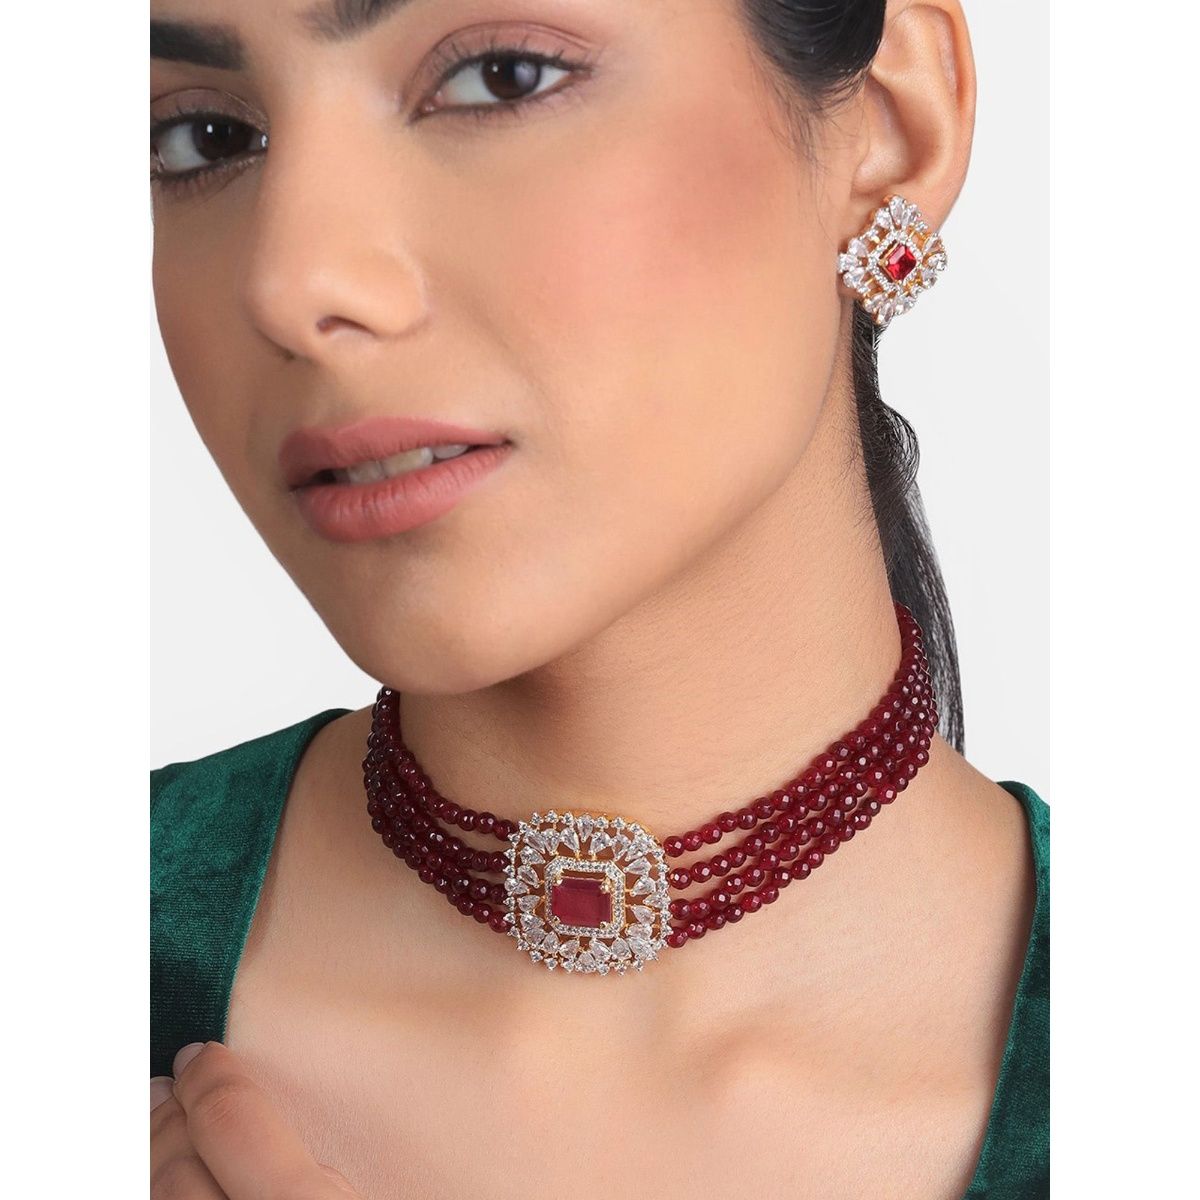 22K Gold Choker Necklace & Earrings Set with Uncut Diamonds,Rubies,Emeralds  & Beads - 235-DS680 in 87.100 Grams